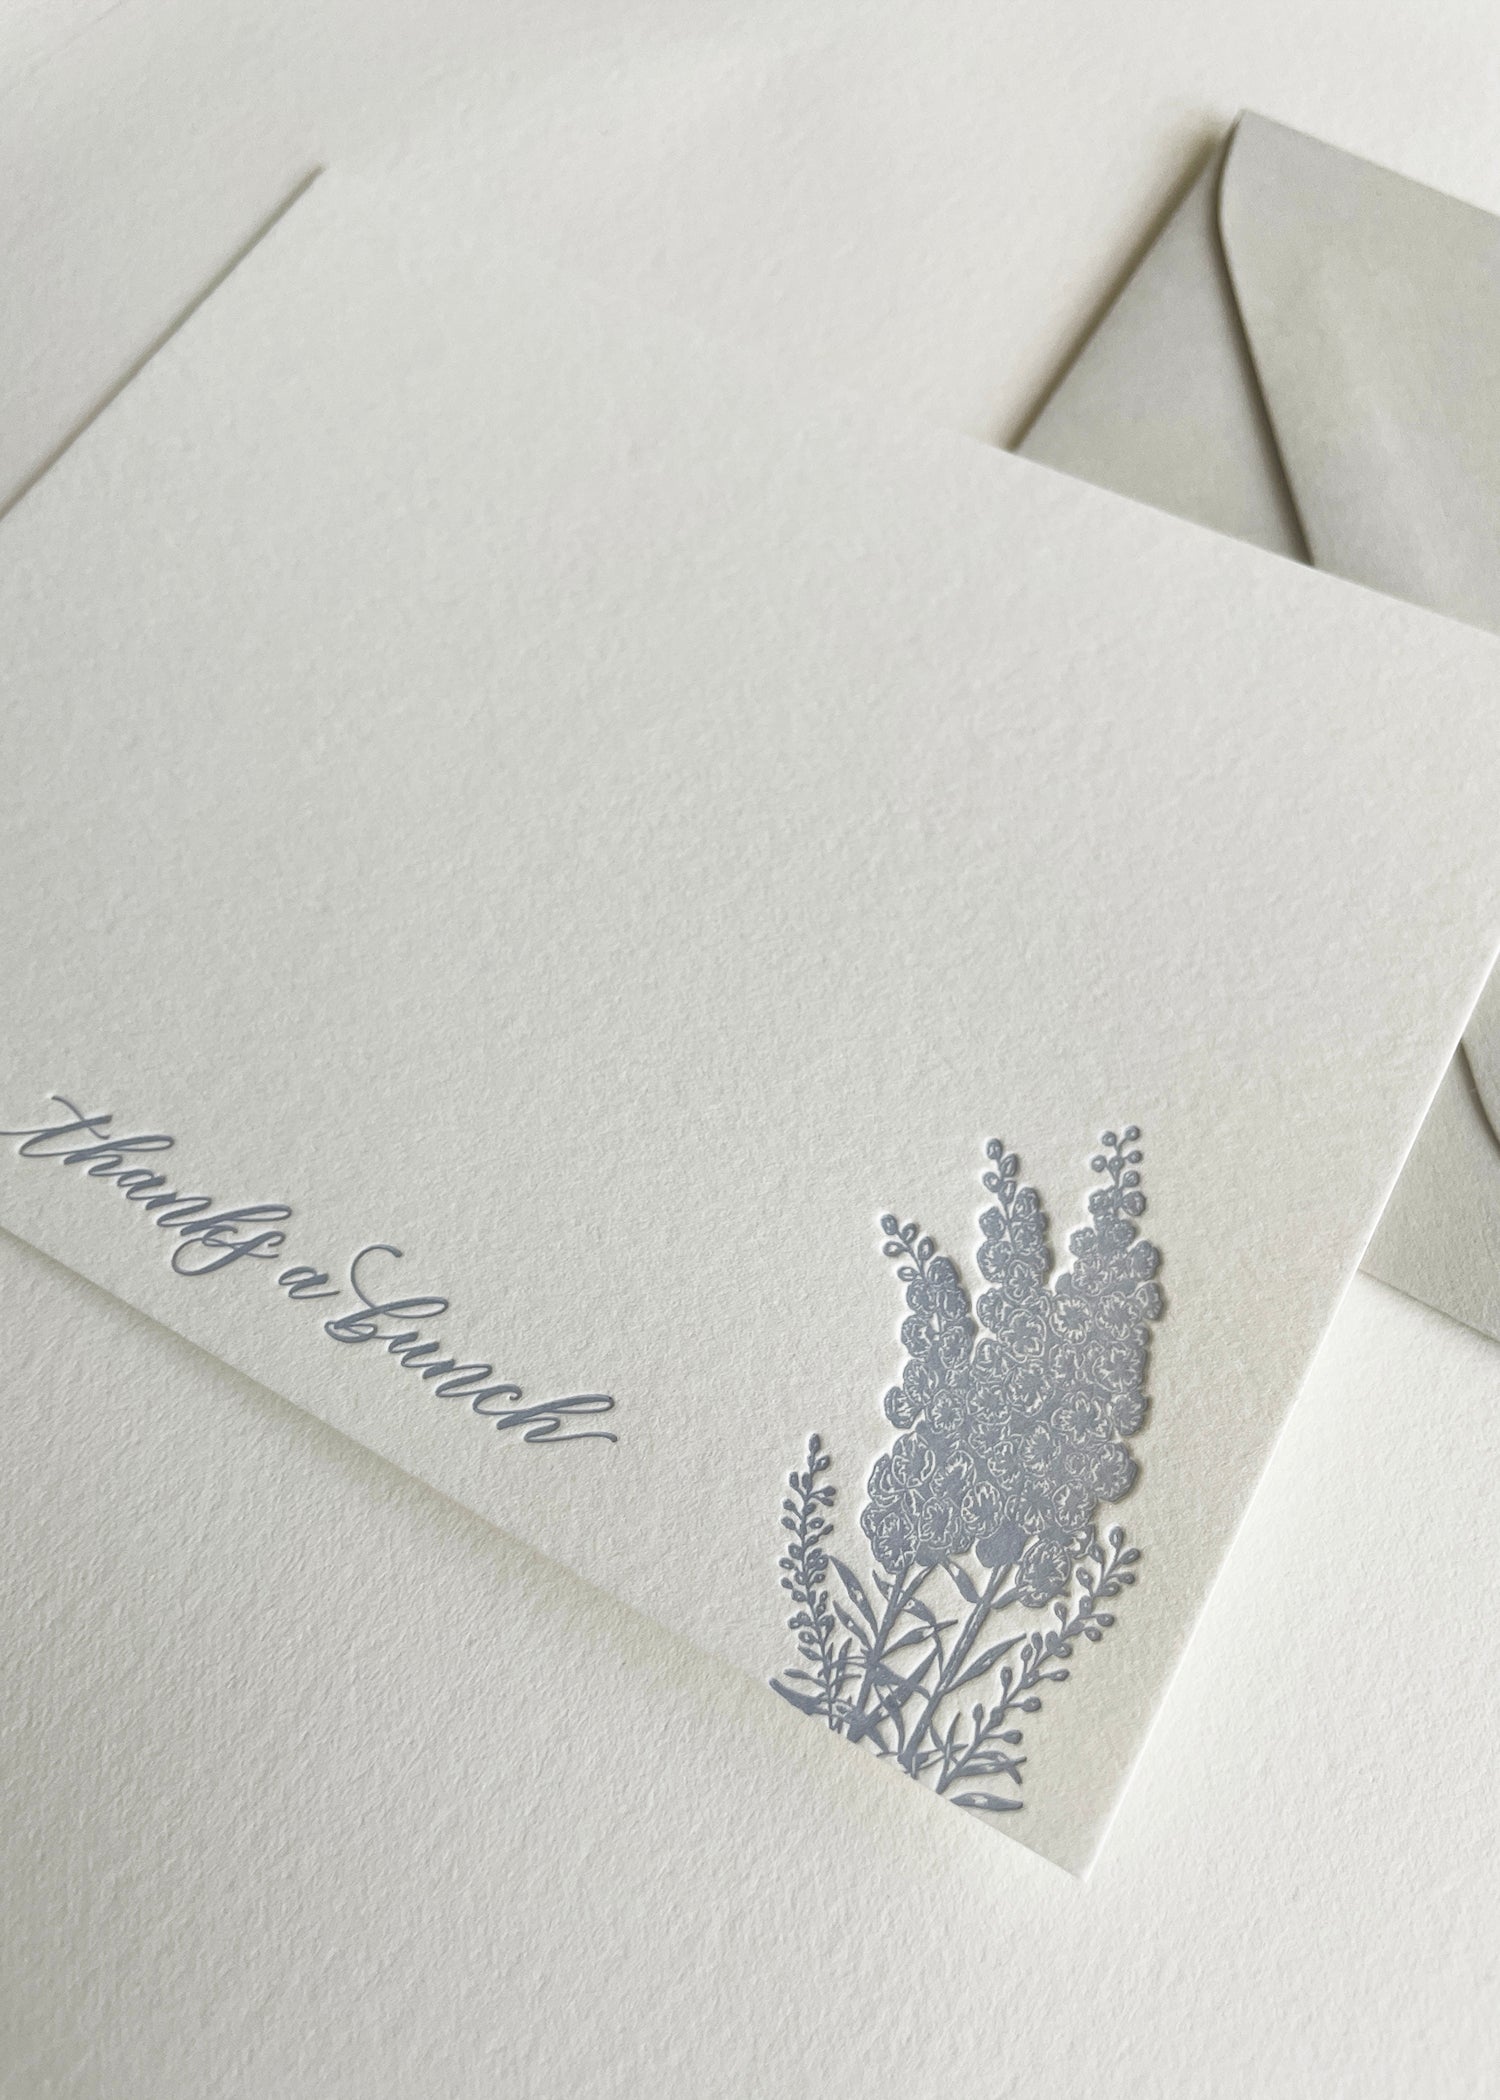 Letterpress flat note card with florals that says "thanks a bunch" by Rust Belt Love